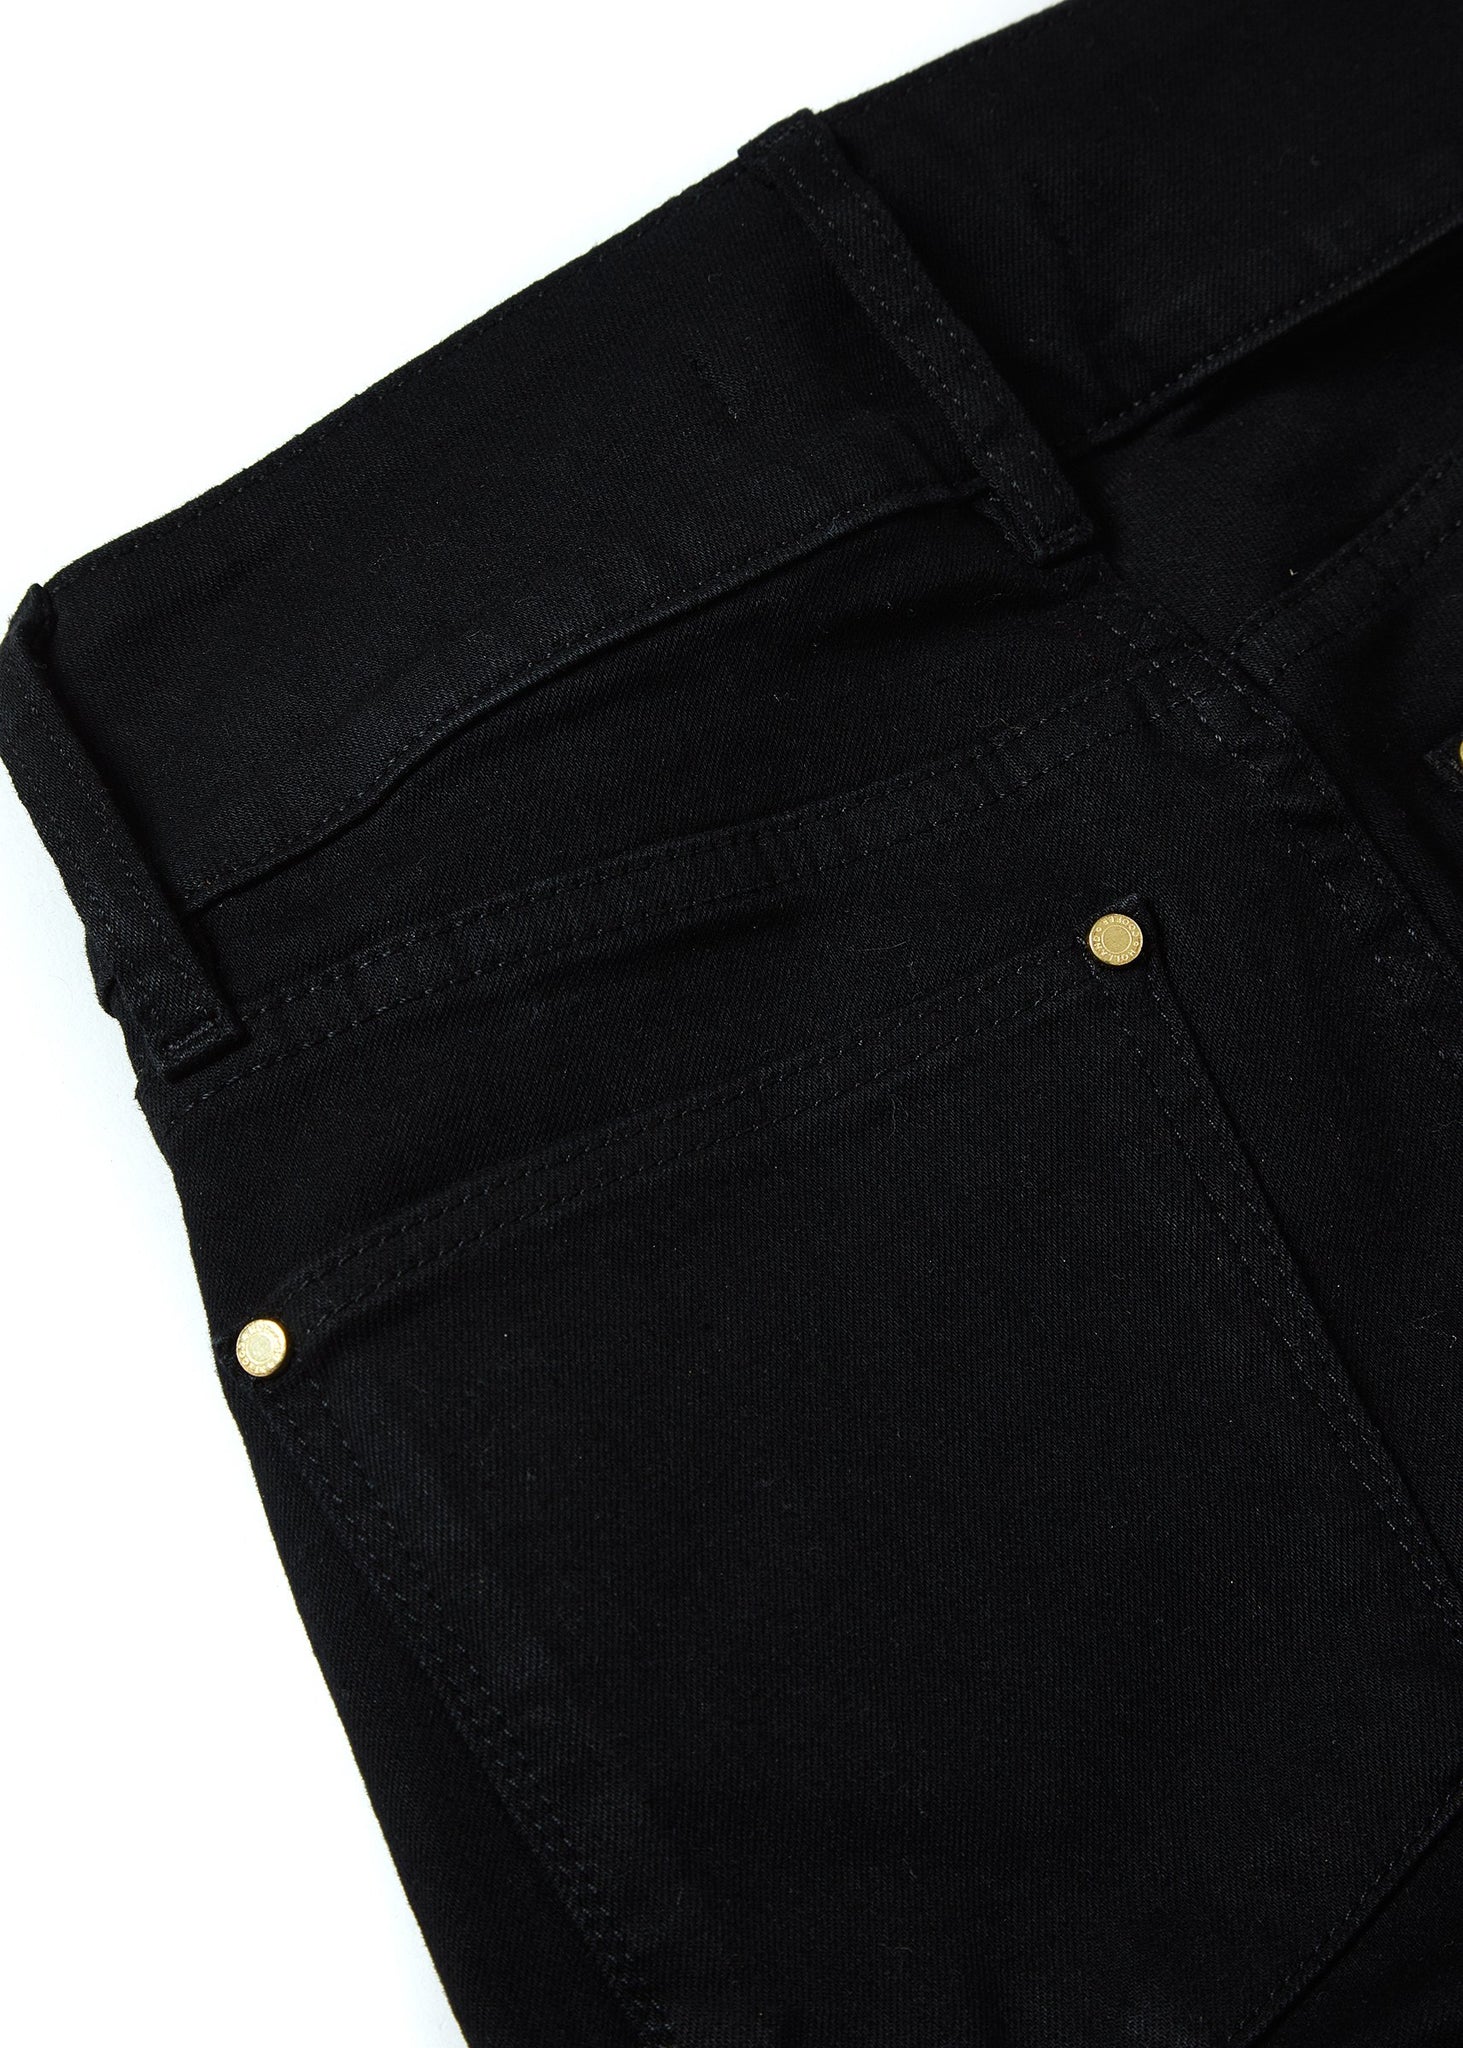 back pocket detail on womens high rise black denim flared jean with centre front zip fly fastening with two open pockets at the front and back